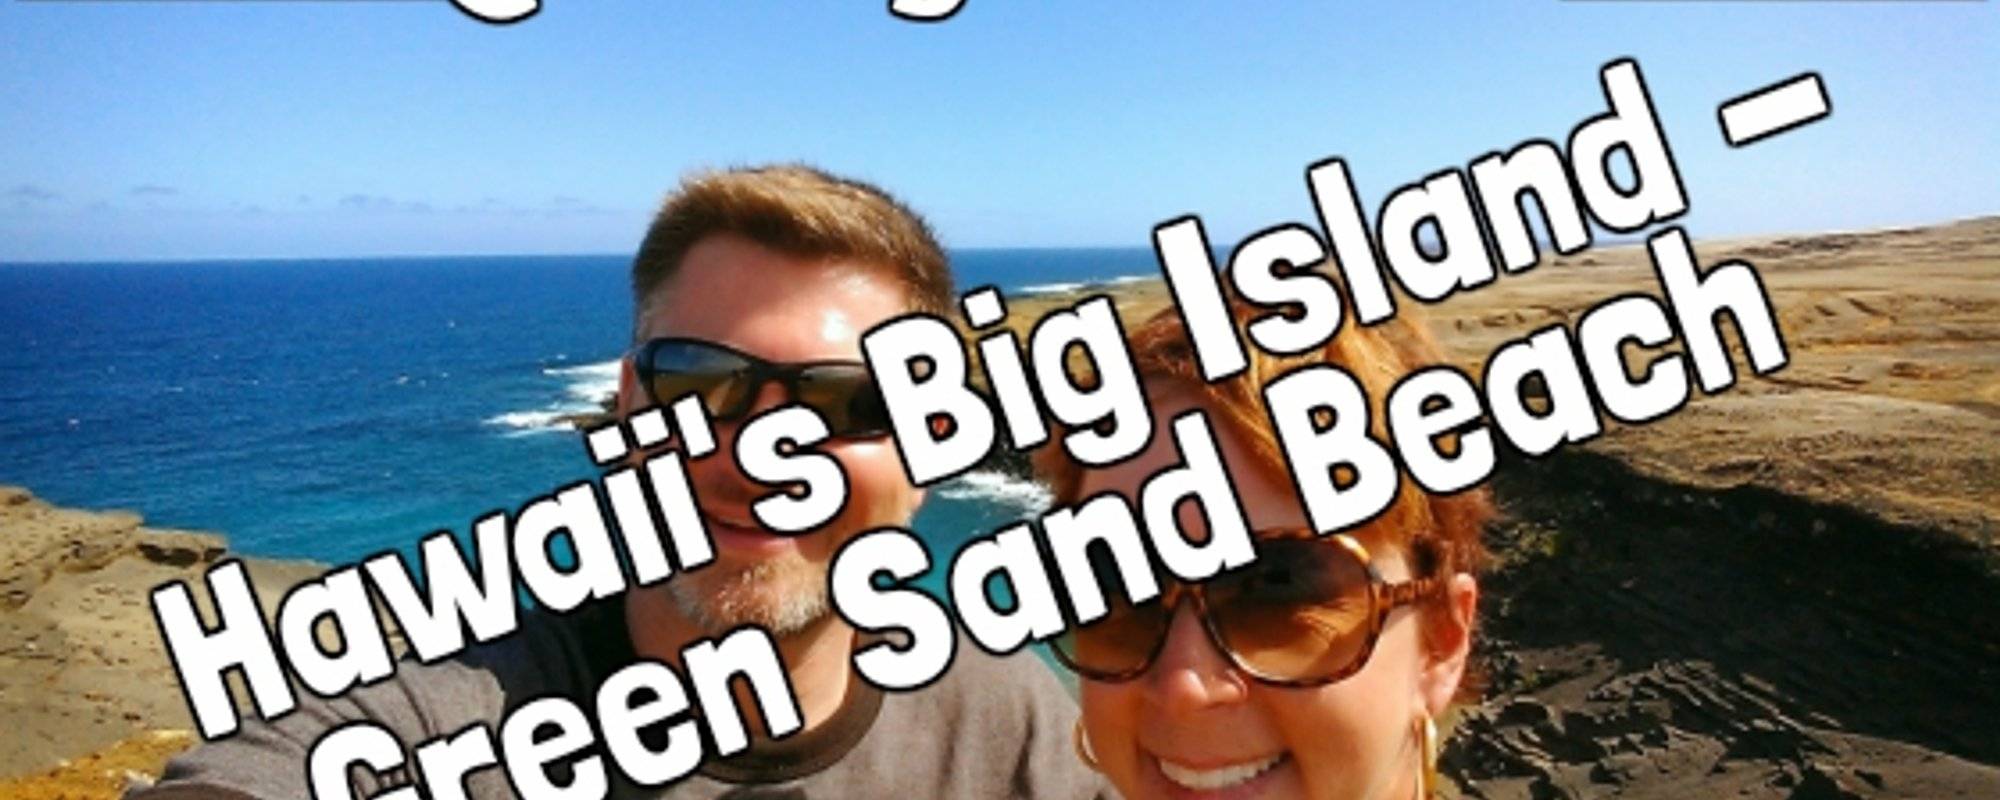 Qberry Travels: Hawaii's Big Isand Series - The Green Sand Beach